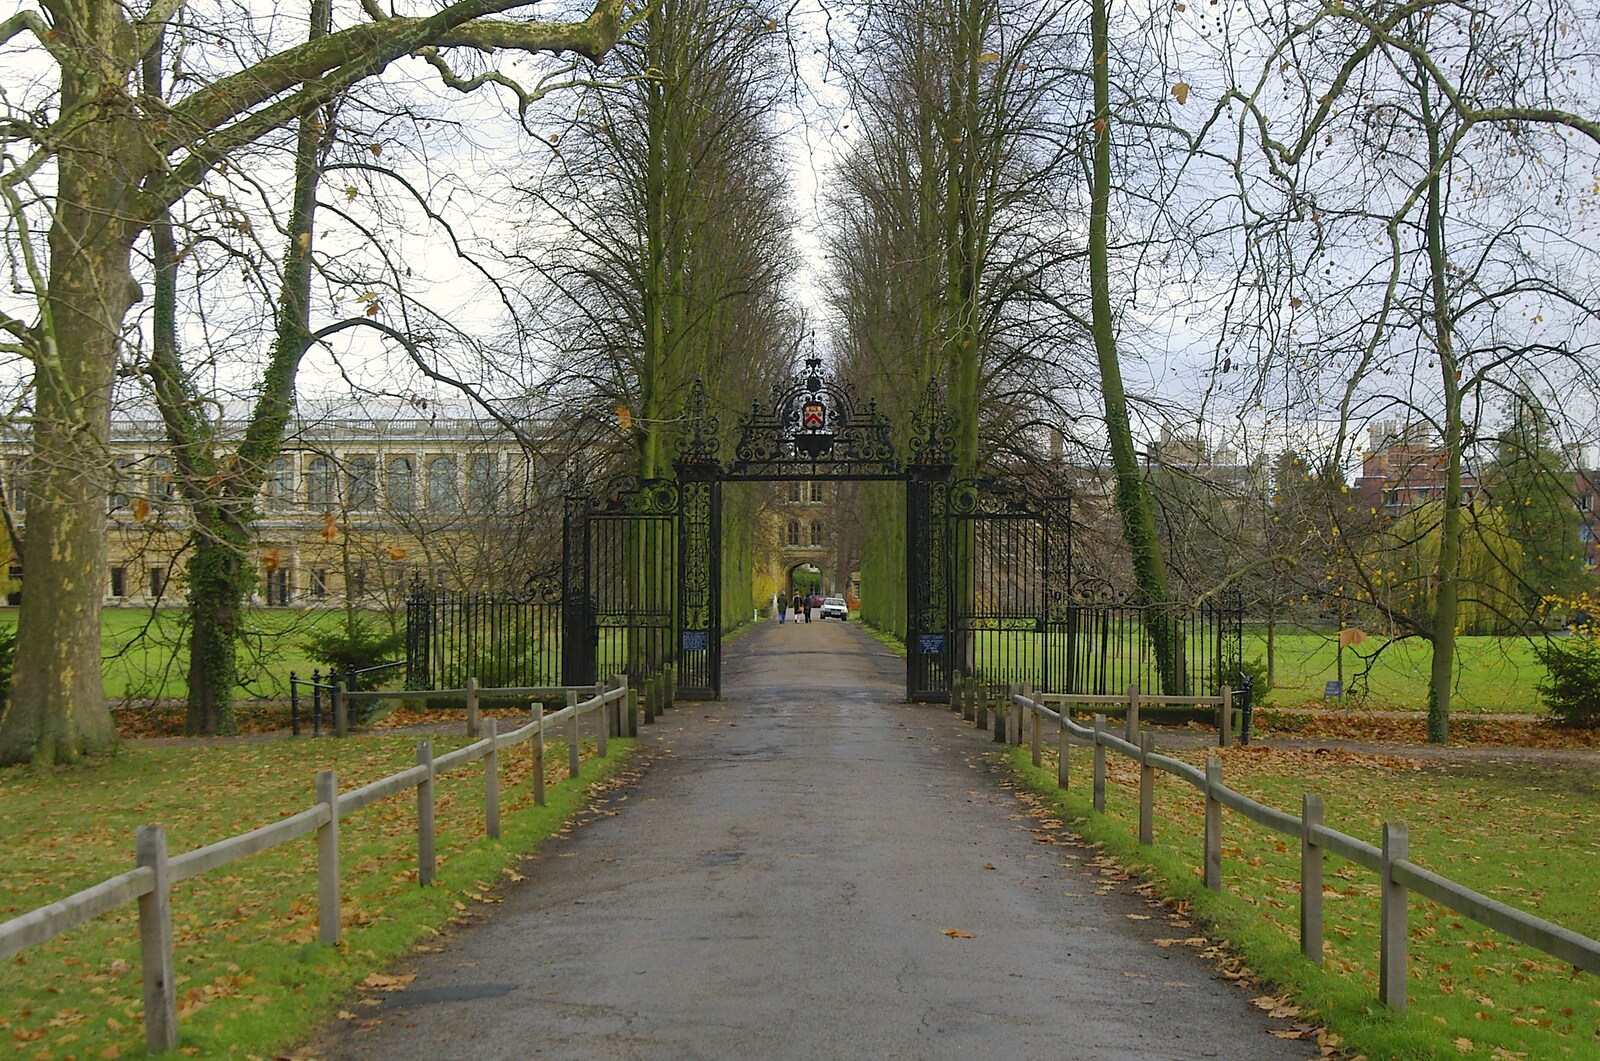 A gate to St. John's College from Autumn Colleges: a Wander around The Backs, Cambridge - 26th November